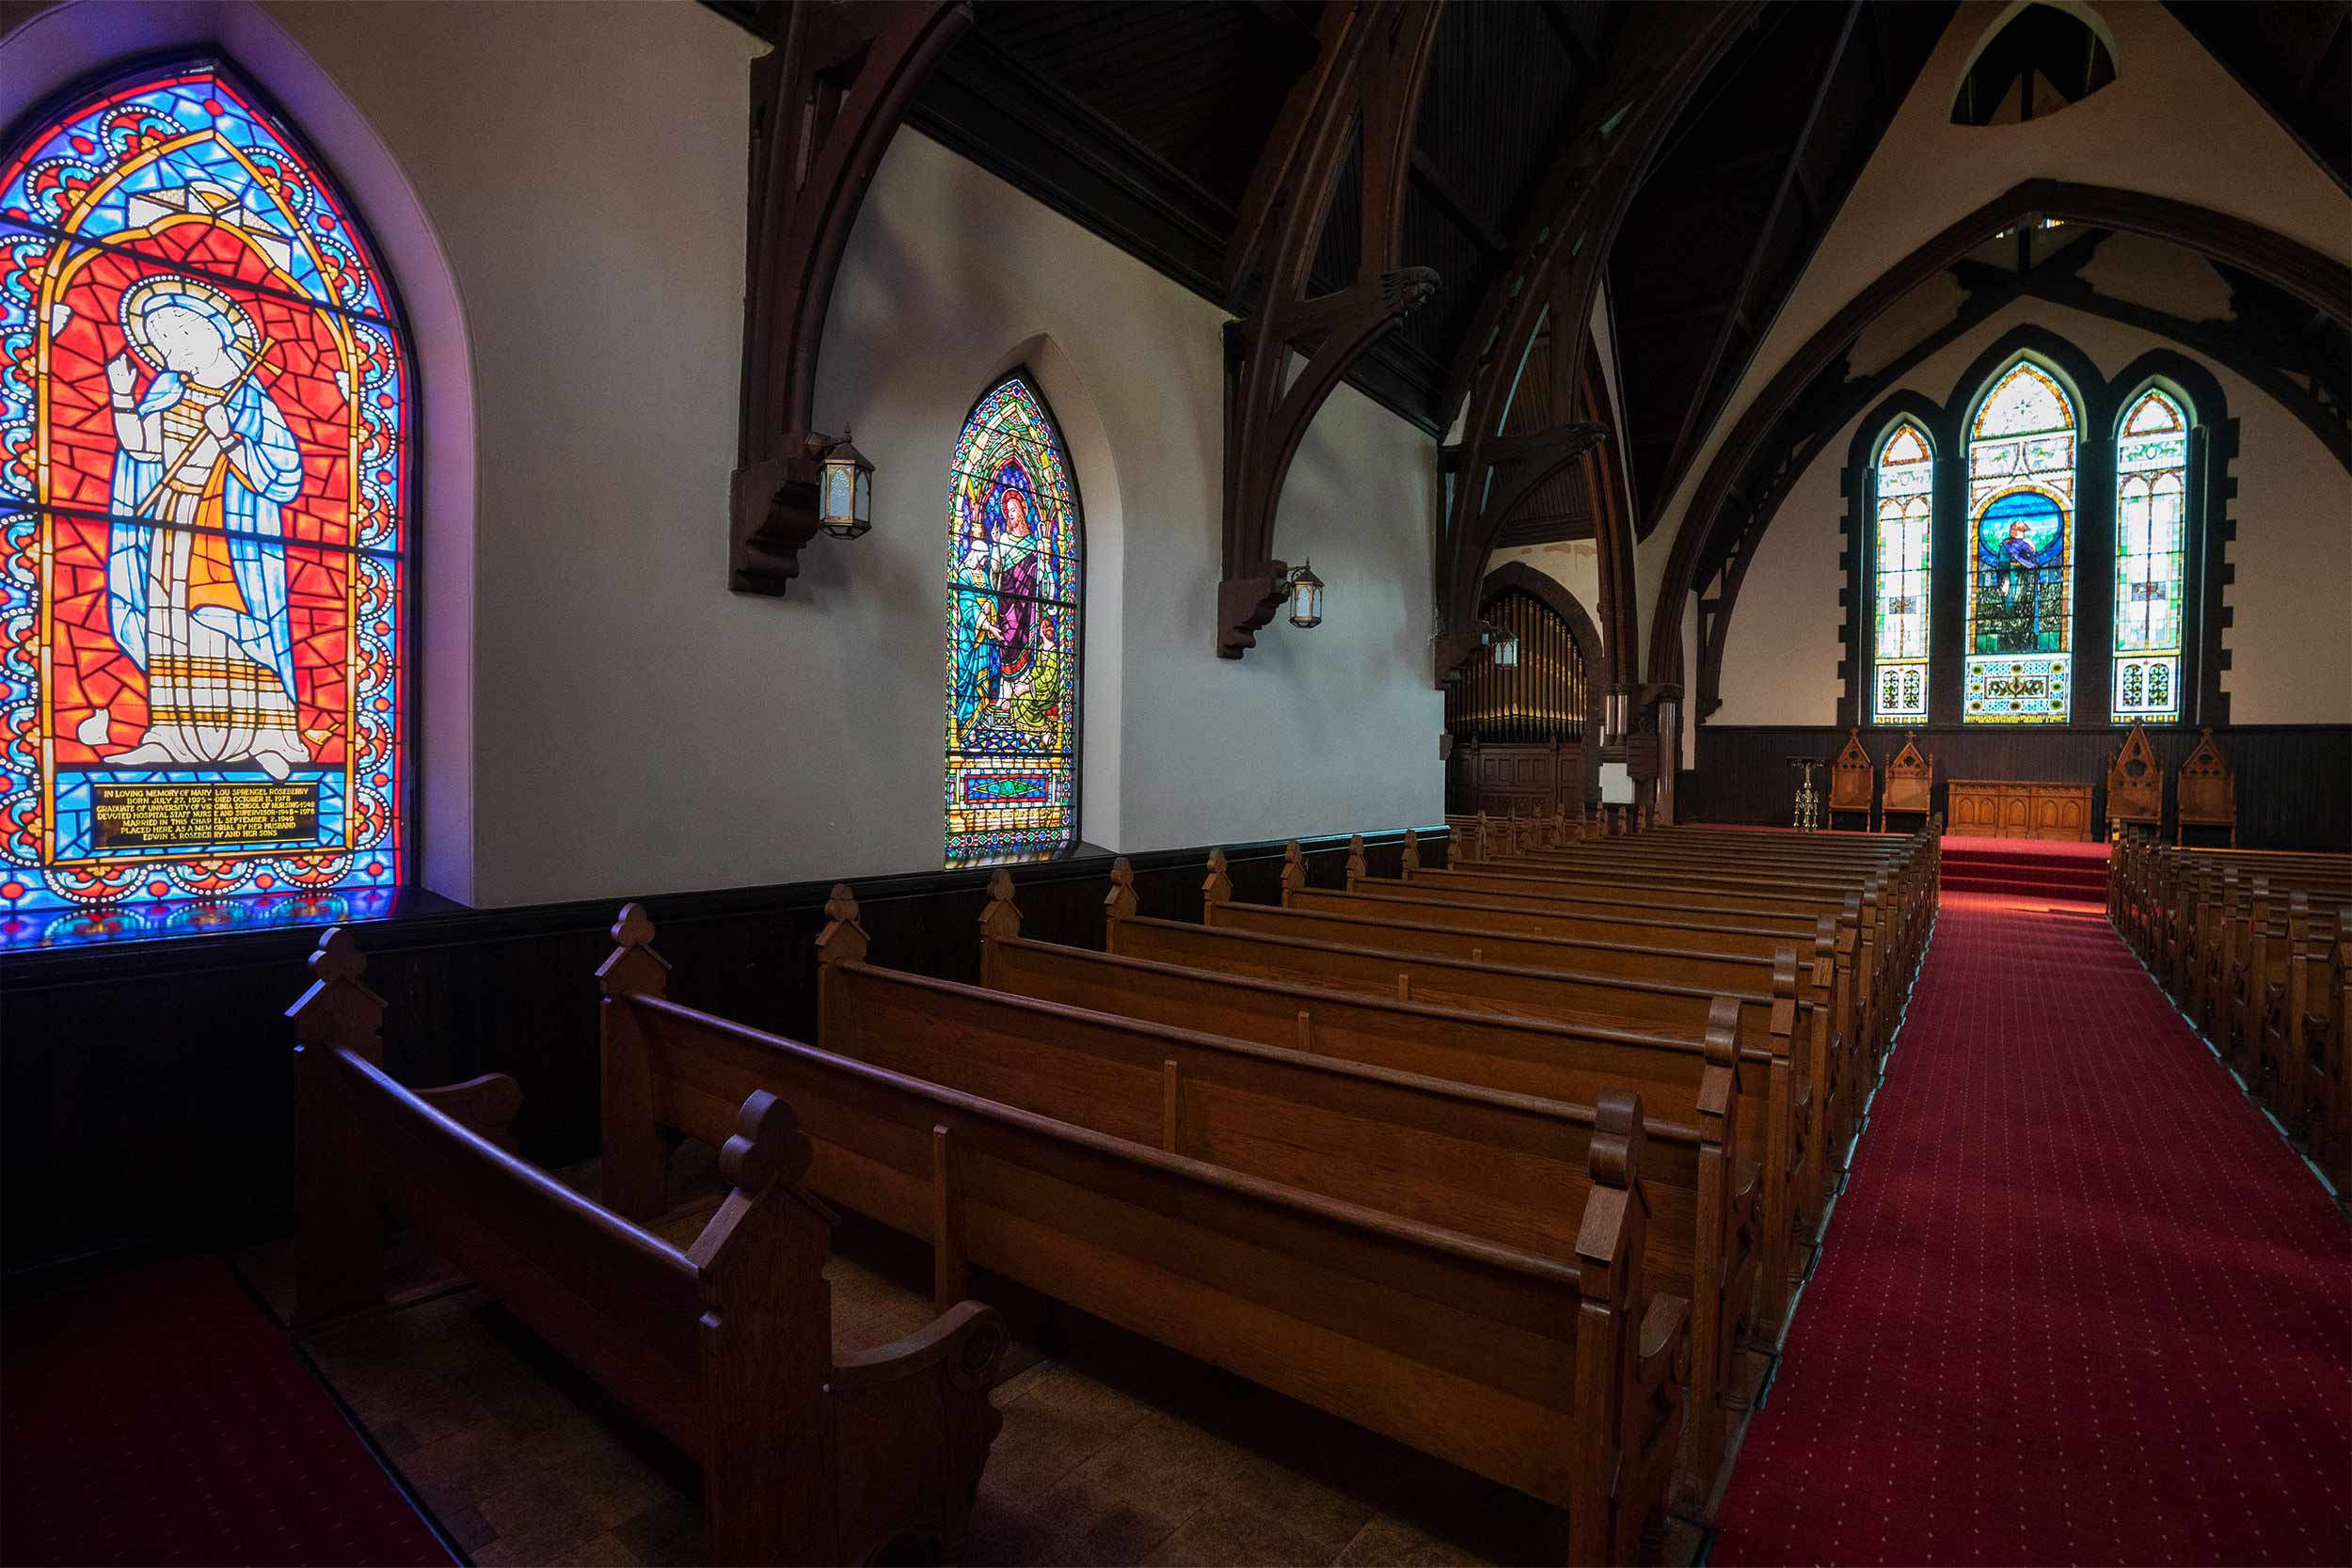 The interior of the chapel contains rows of oak pews, stained glass windows and a red carpeted aisle